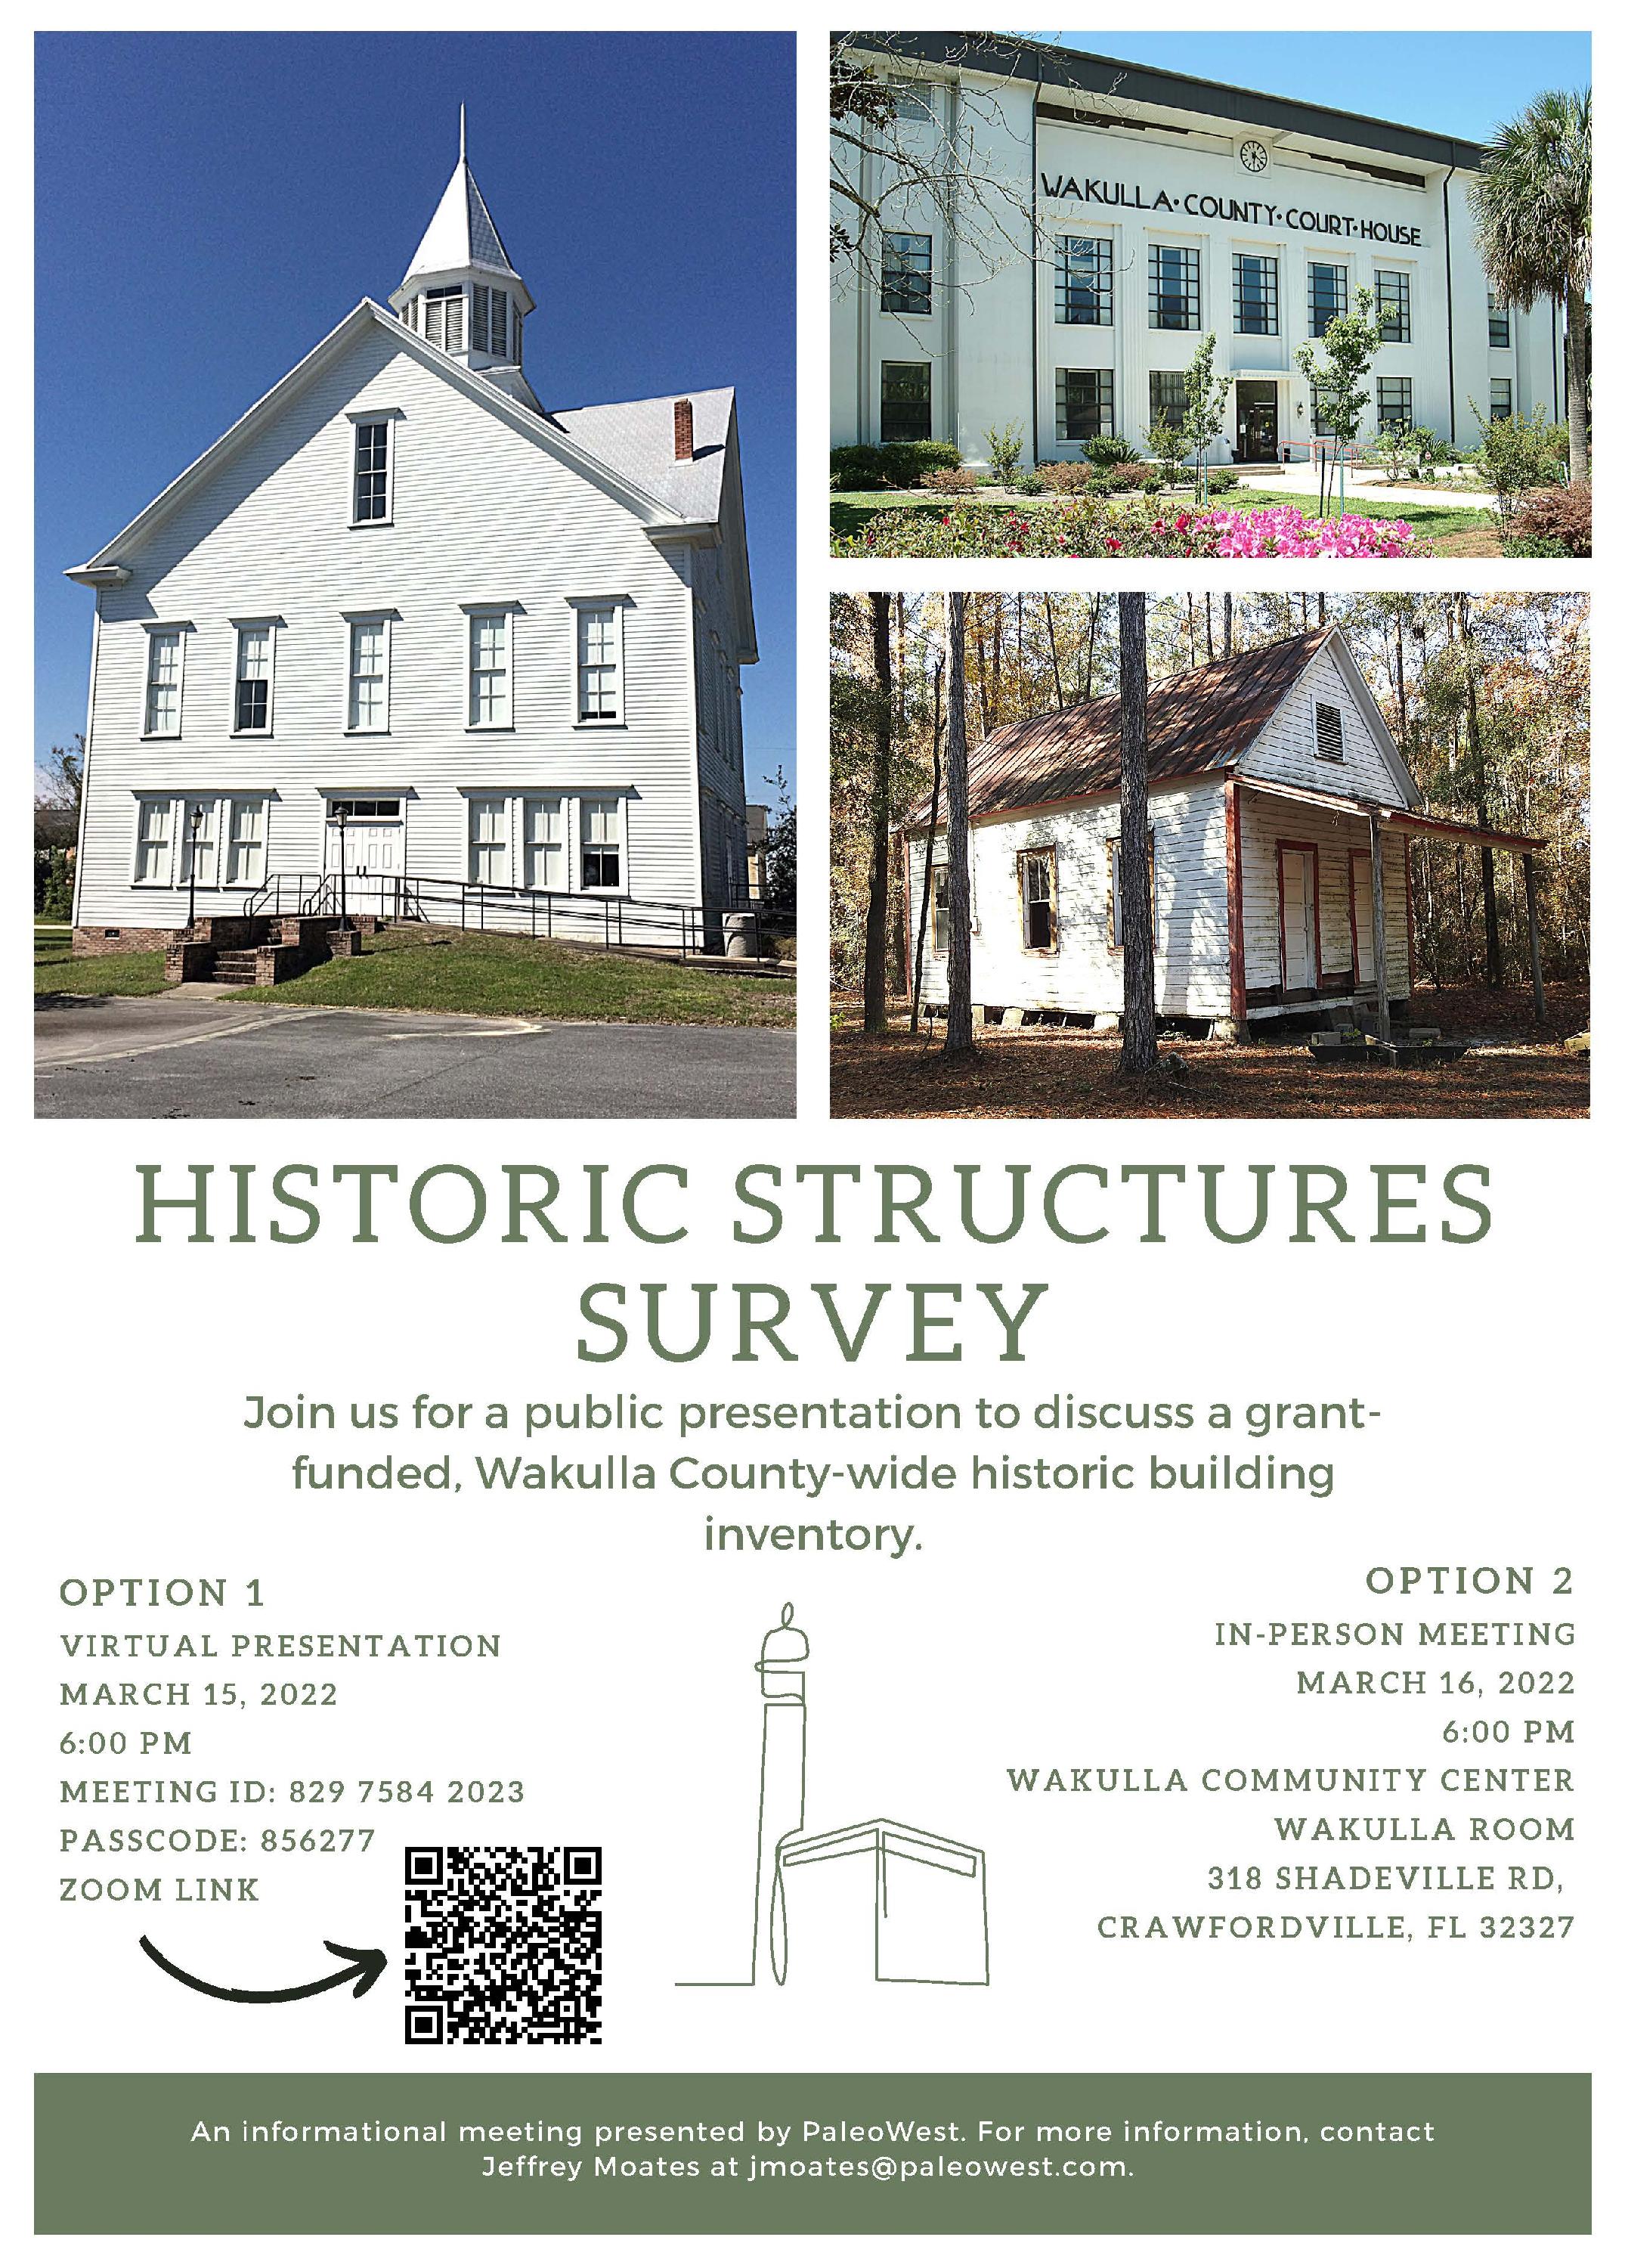 Wakulla County Historic Structures Survey Flyer